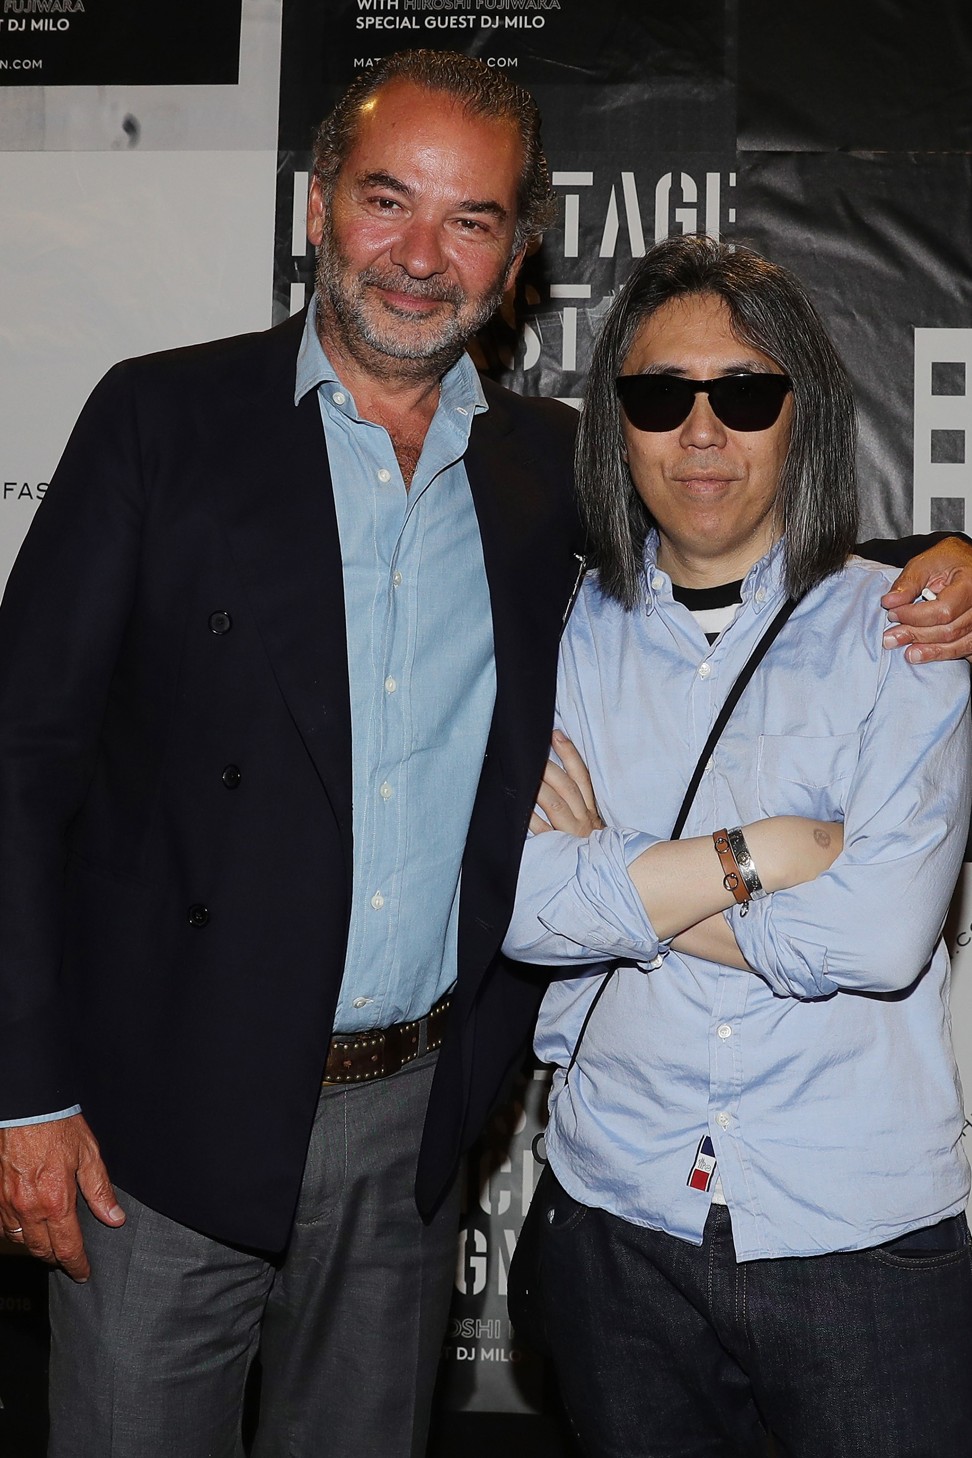 Moncler fashion brand owner Remo Ruffini (left) and Fujiwara. Photo: Getty Images for Moncler